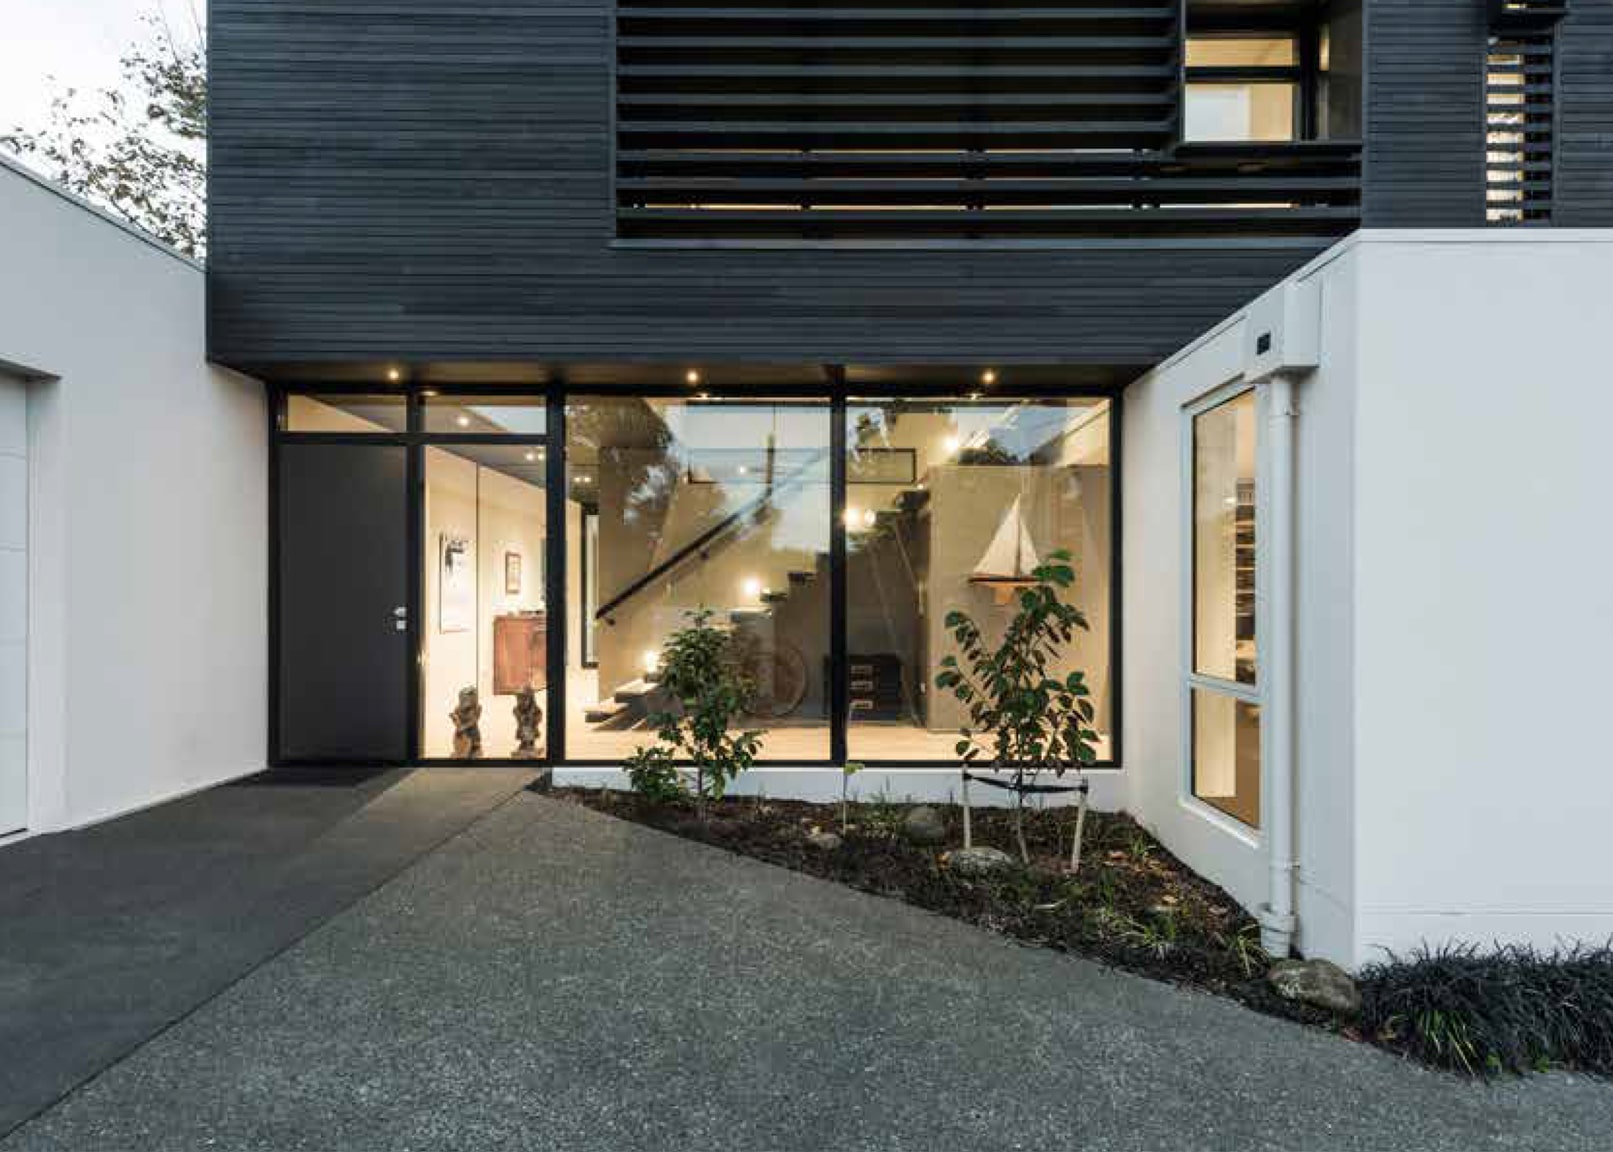 Ellis Residence Architectural Build in Christchurch